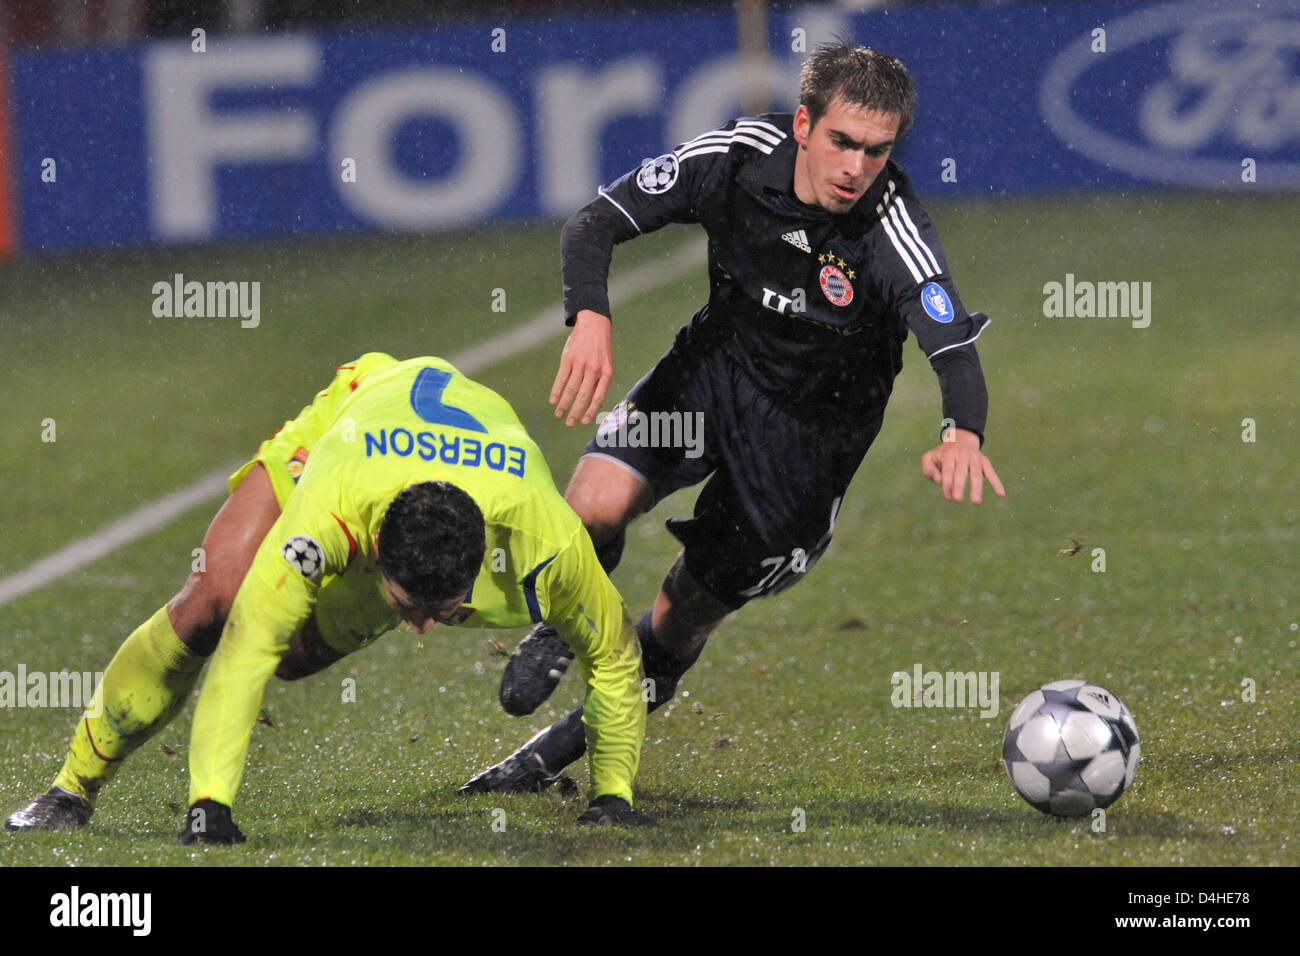 Ederson (L) of Olympique Lyon vies for the ball with Philipp Lahm of FC Bayern Munich during the Champions League Group F match at Stade de Gerland in Lyon, France, 10 December 2008. Bayern Munich defeated Lyon 3-2 securing the first place in UEFA Champions League Group F. Photo: Andreas Gebert Stock Photo